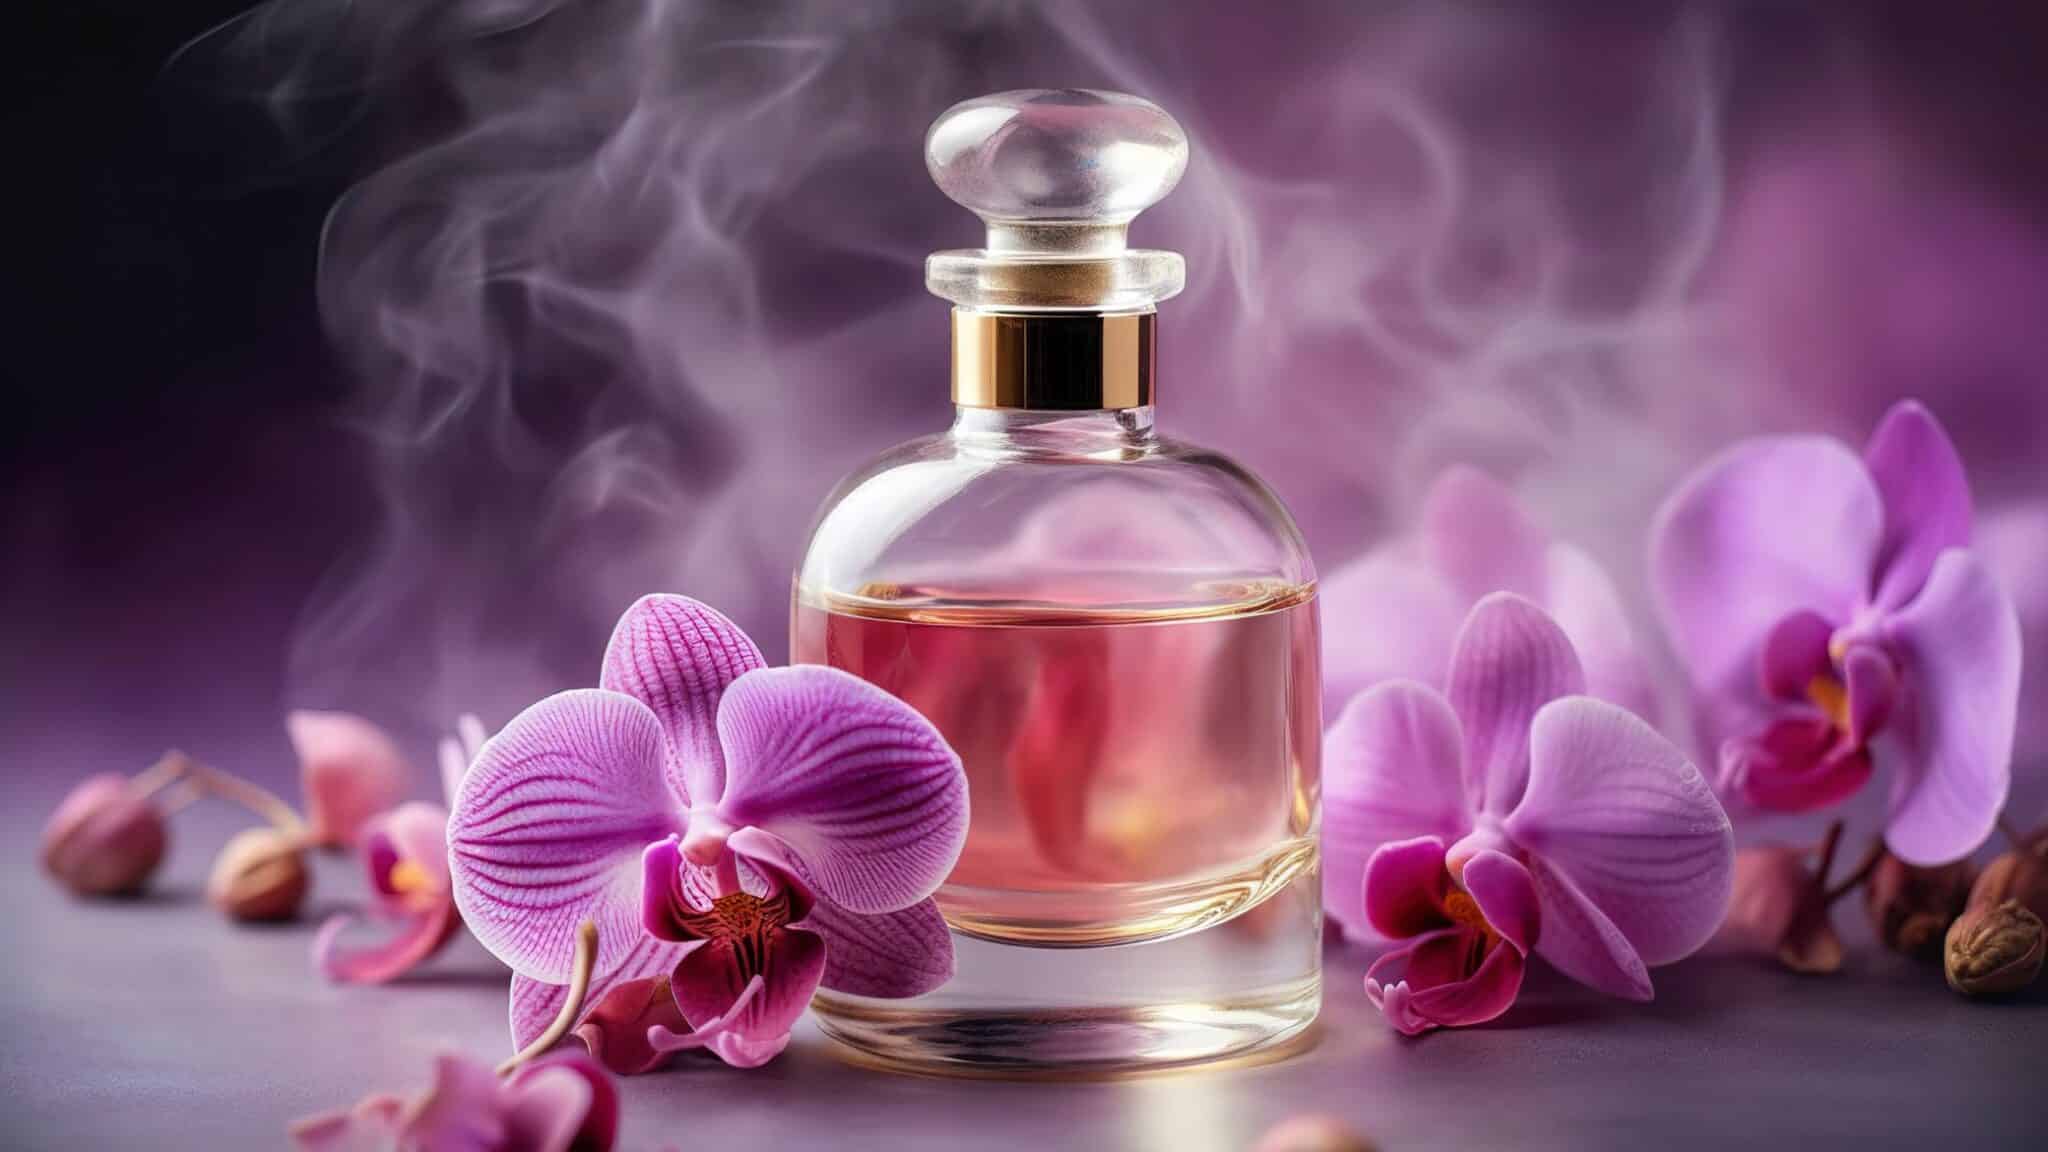 “Smell” A New Weapon To Boost Your Memory, Deter Dementia?